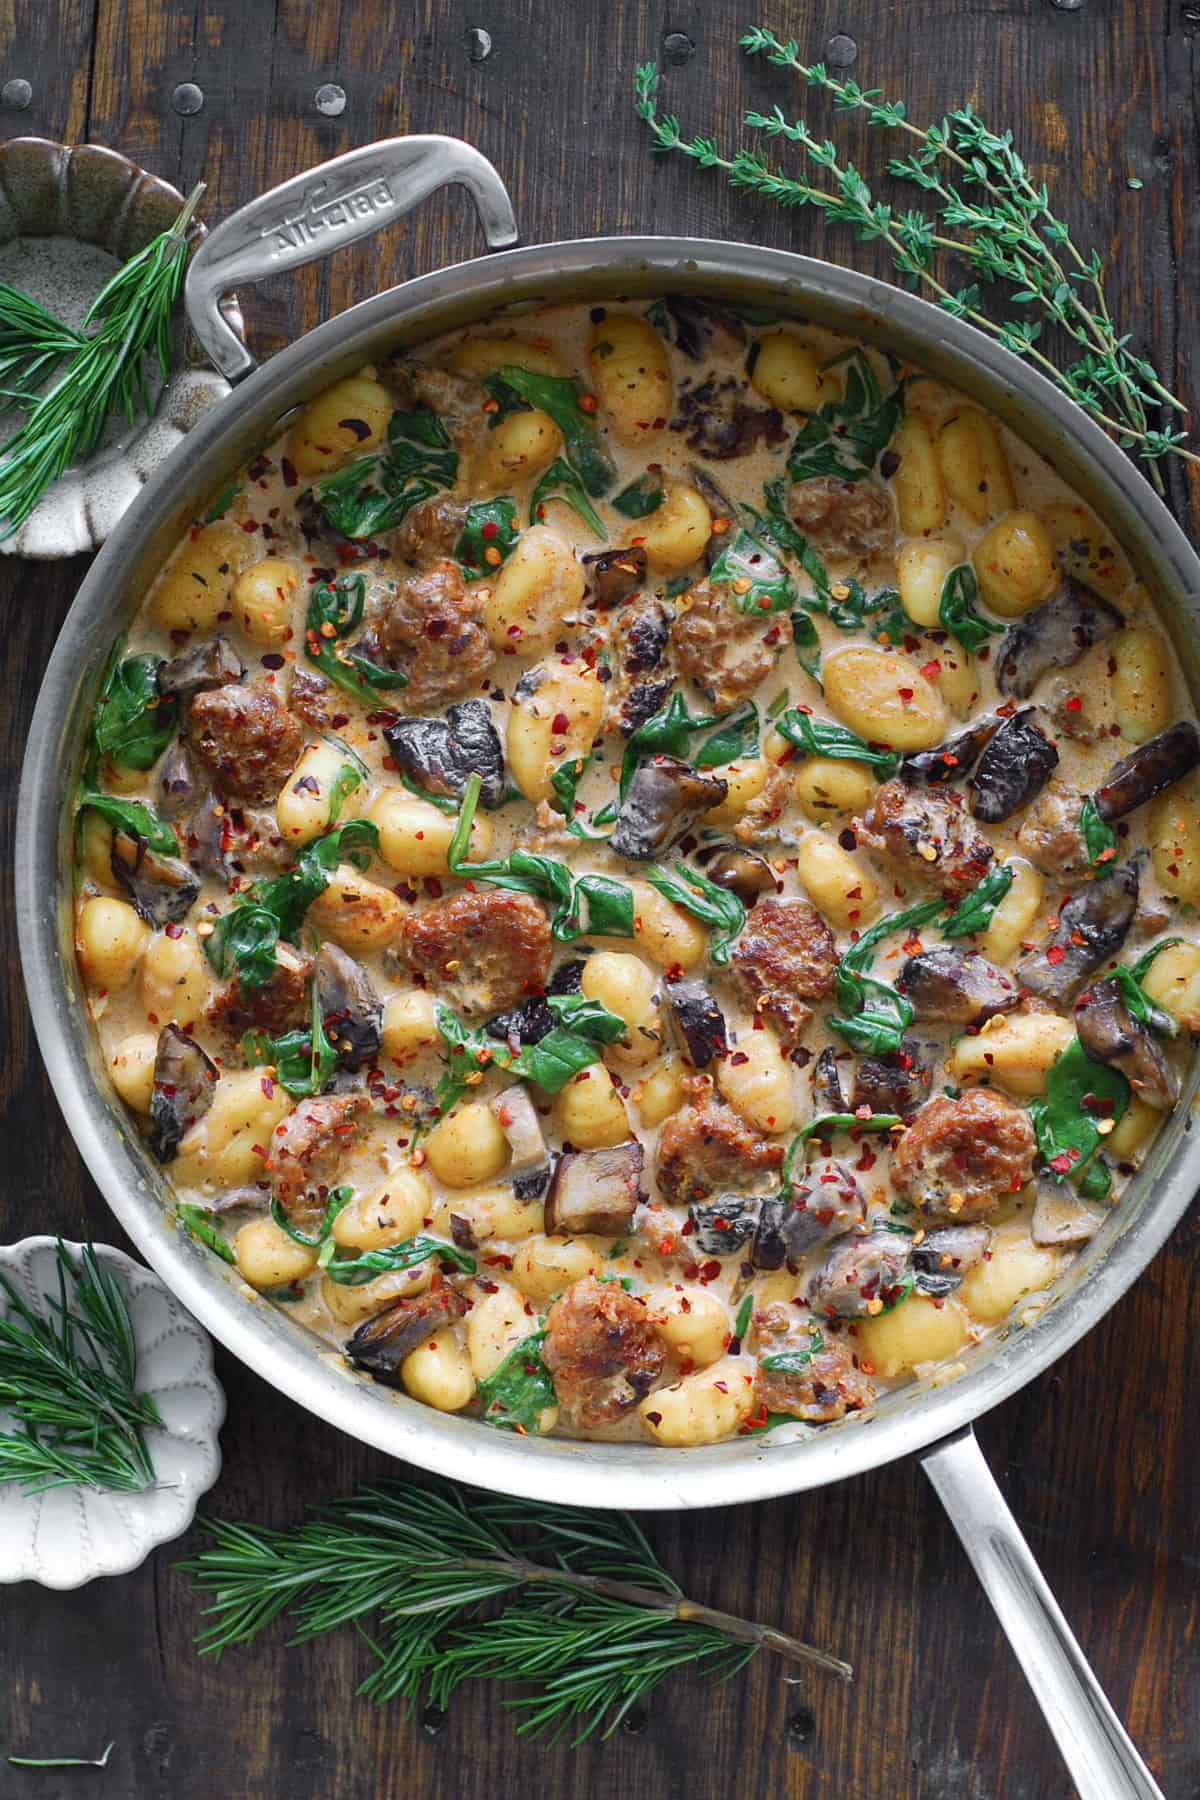 Creamy Gnocchi with Italian Sausage, Chopped Portobello Mushrooms, and Spinach - in a stainless steel skillet.